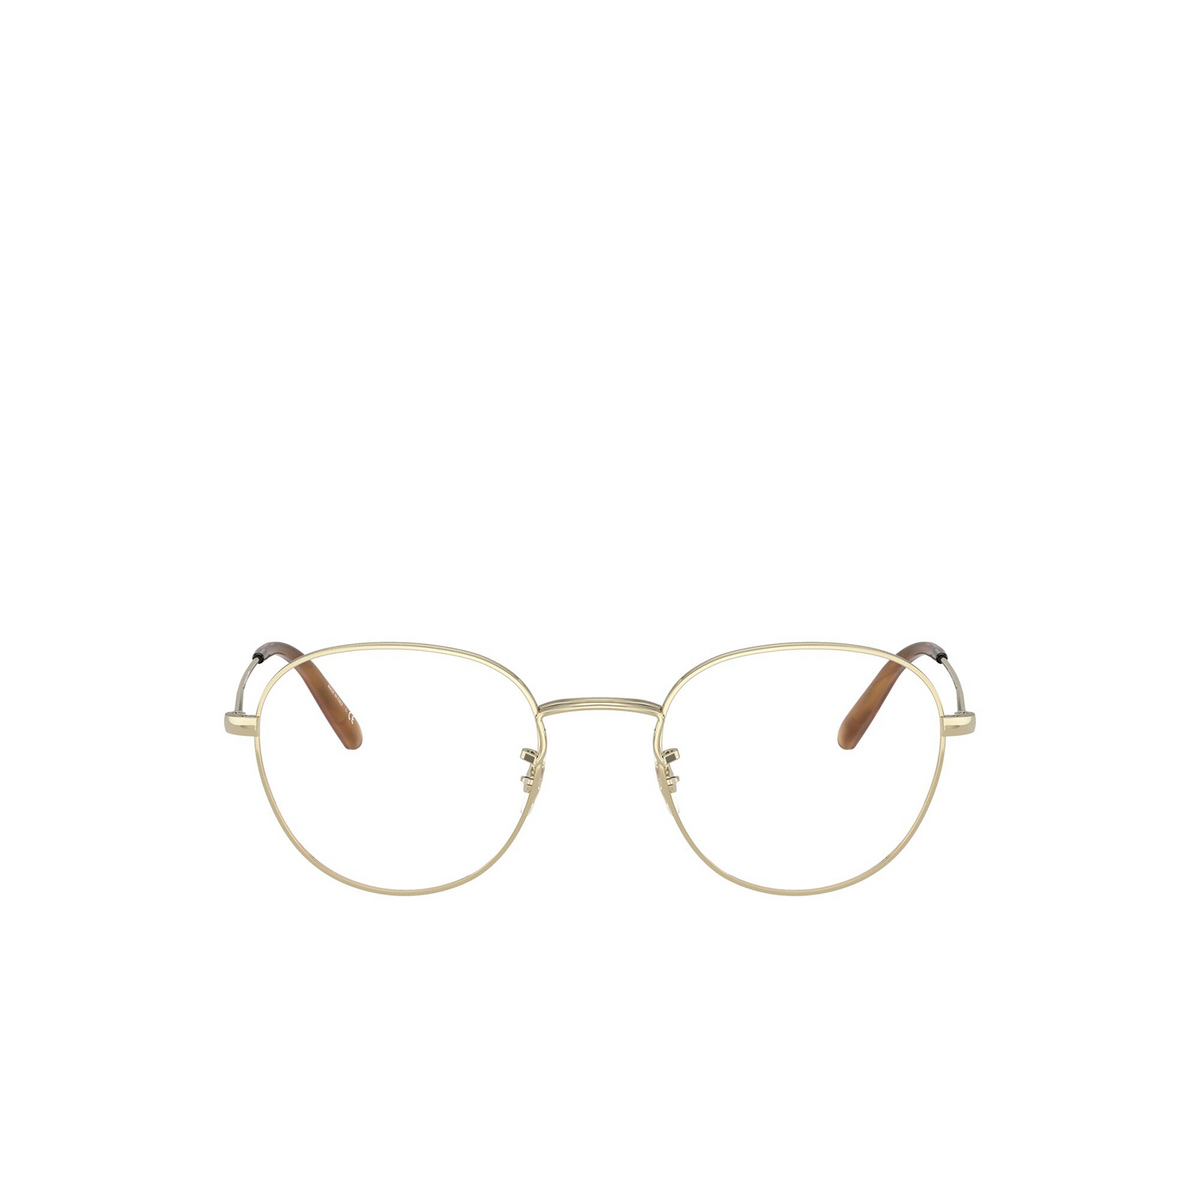 Oliver Peoples® Round Eyeglasses: Piercy OV1281 color Gold 5145 - front view.